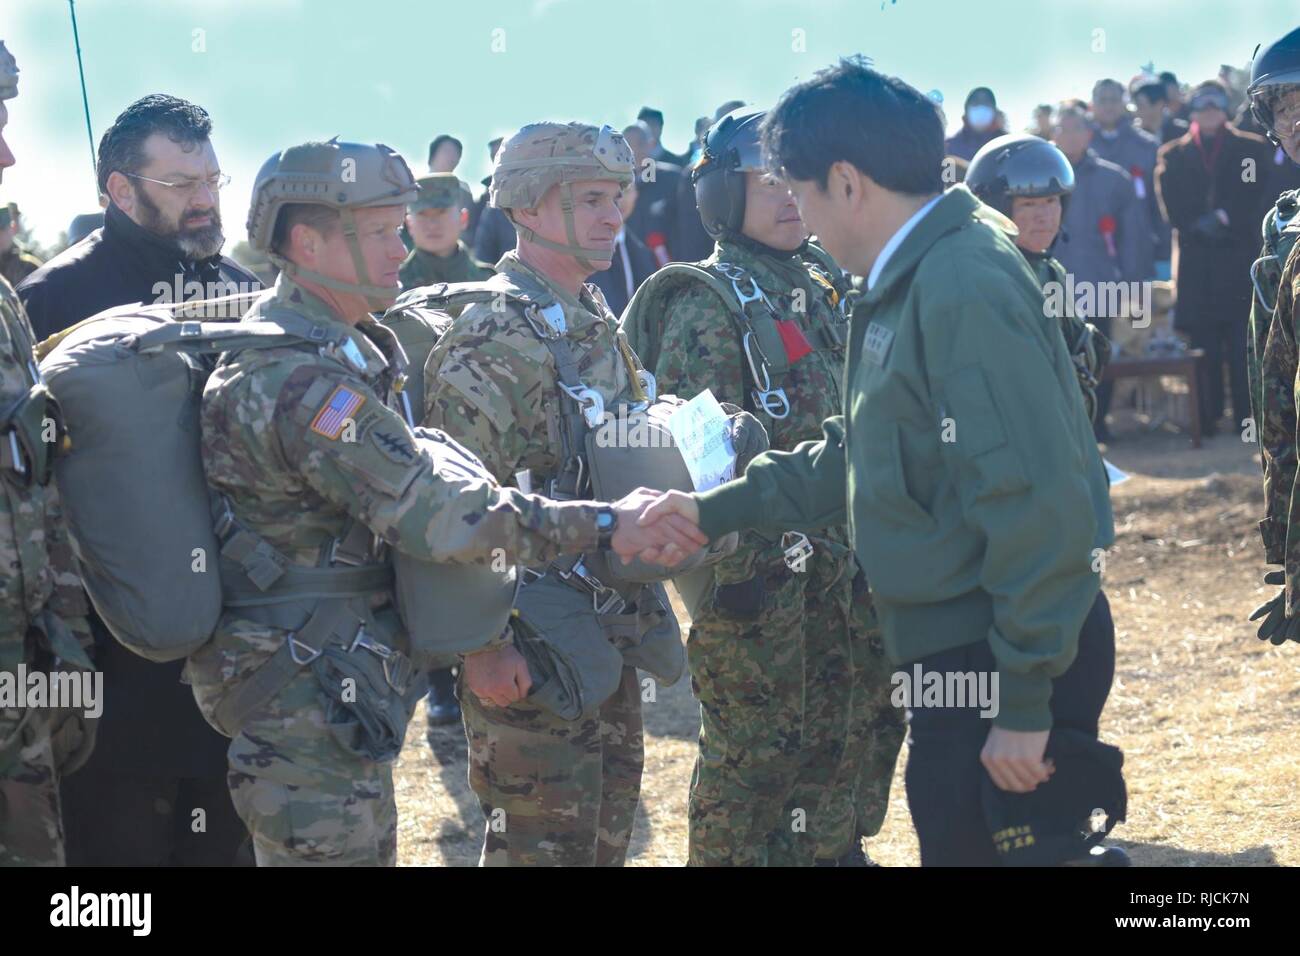 Japanese Minister Of Defense Itsunori Onodera Shake Hands With Lt Col Ryan Armstrong Battalion Commander Of 1st Battalion 1st Special Forces Group Airborne During The Japanese Ground Self Defense Forces Jgsdf Annual